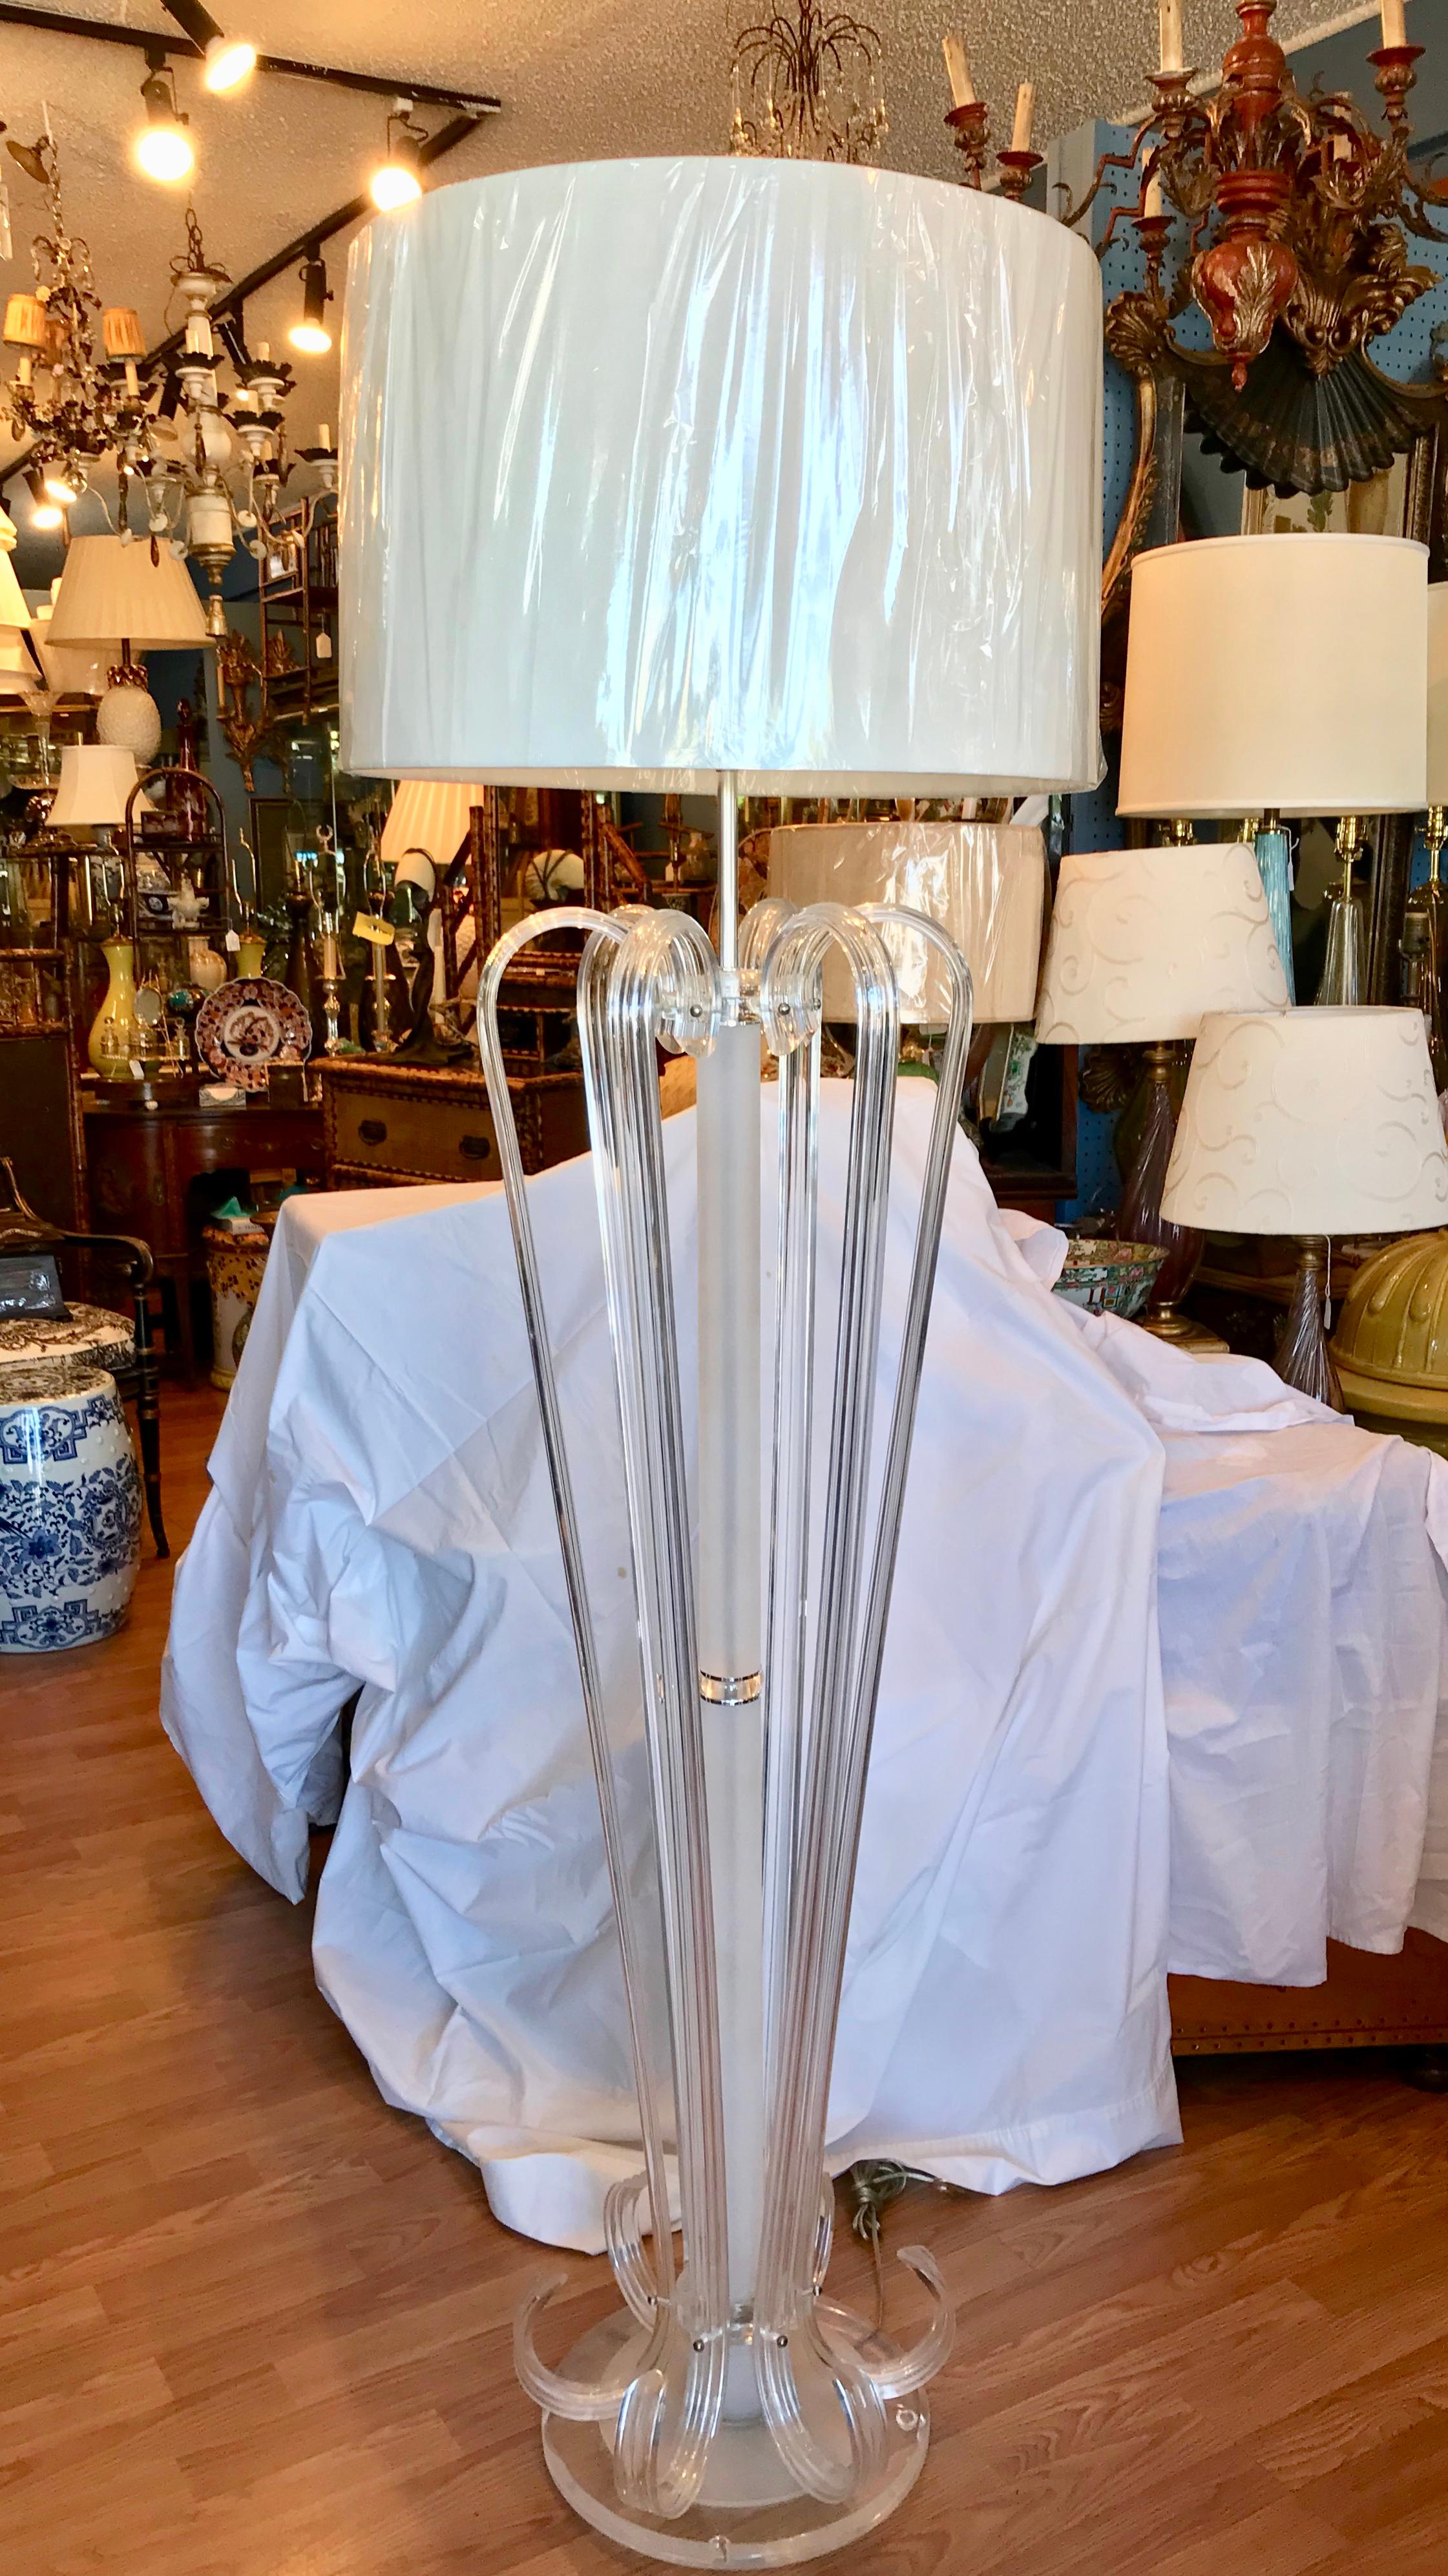 A superb example with Lucite bent in the manner of Dorothy Thorpe.
It resembles Murano glass in the way in which it is so finely fashioned.
Dramatic in scale and form, and capped with its original tall Lucite finial.
The 21